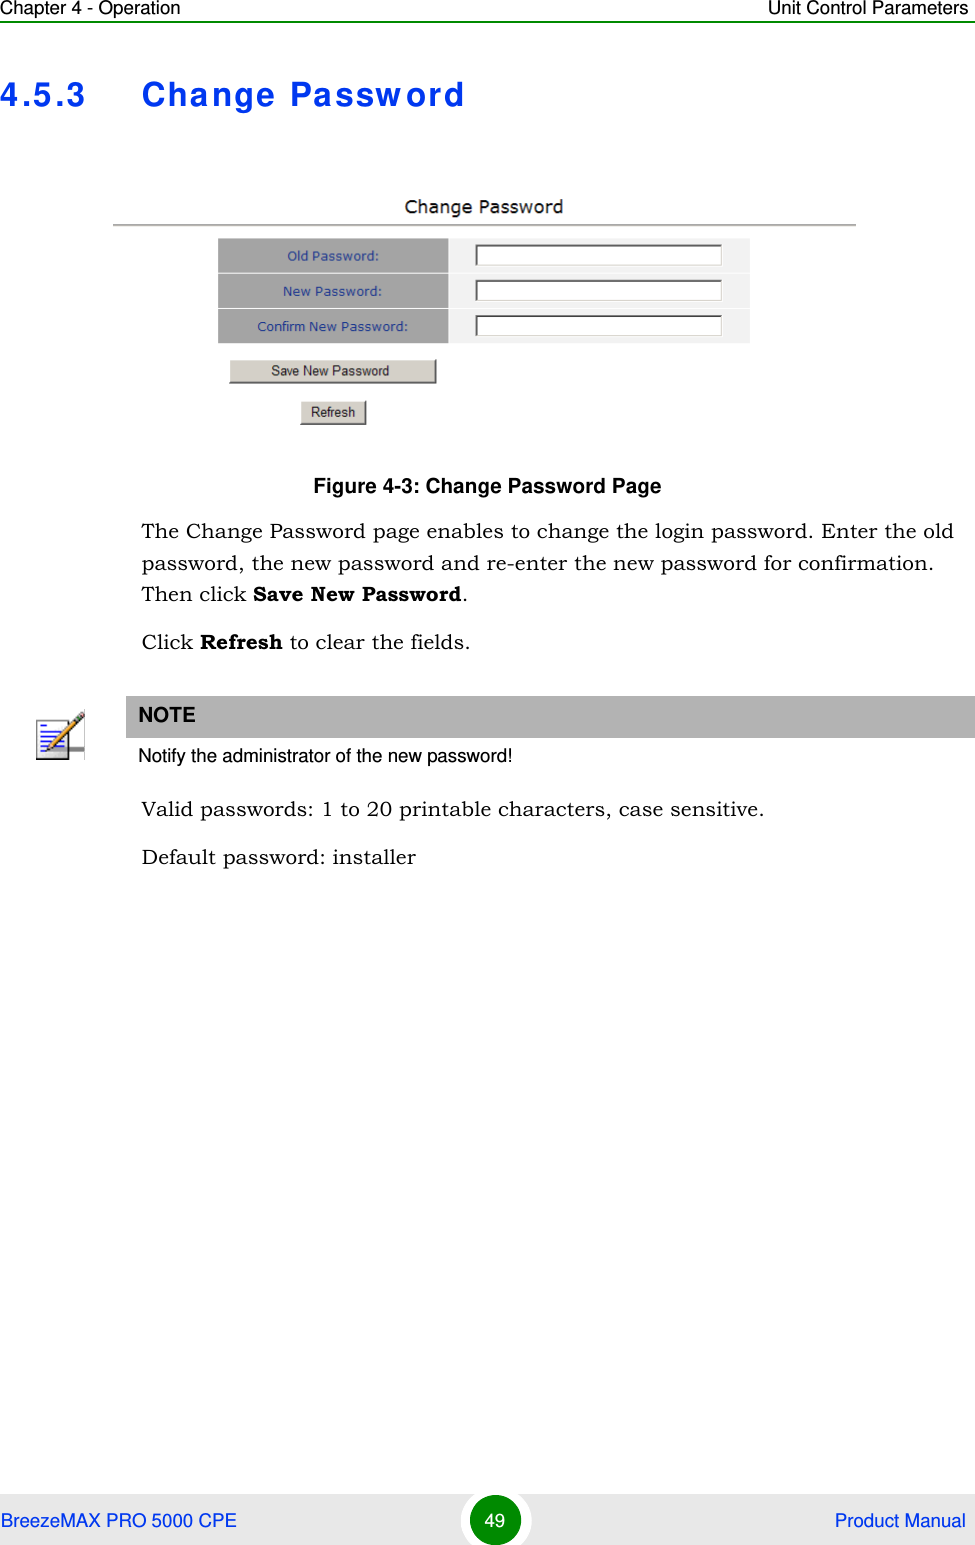 Chapter 4 - Operation Unit Control ParametersBreezeMAX PRO 5000 CPE 49  Product Manual4.5.3 Change PasswordThe Change Password page enables to change the login password. Enter the old password, the new password and re-enter the new password for confirmation. Then click Save New Password.Click Refresh to clear the fields.Valid passwords: 1 to 20 printable characters, case sensitive.Default password: installerFigure 4-3: Change Password PageNOTENotify the administrator of the new password!